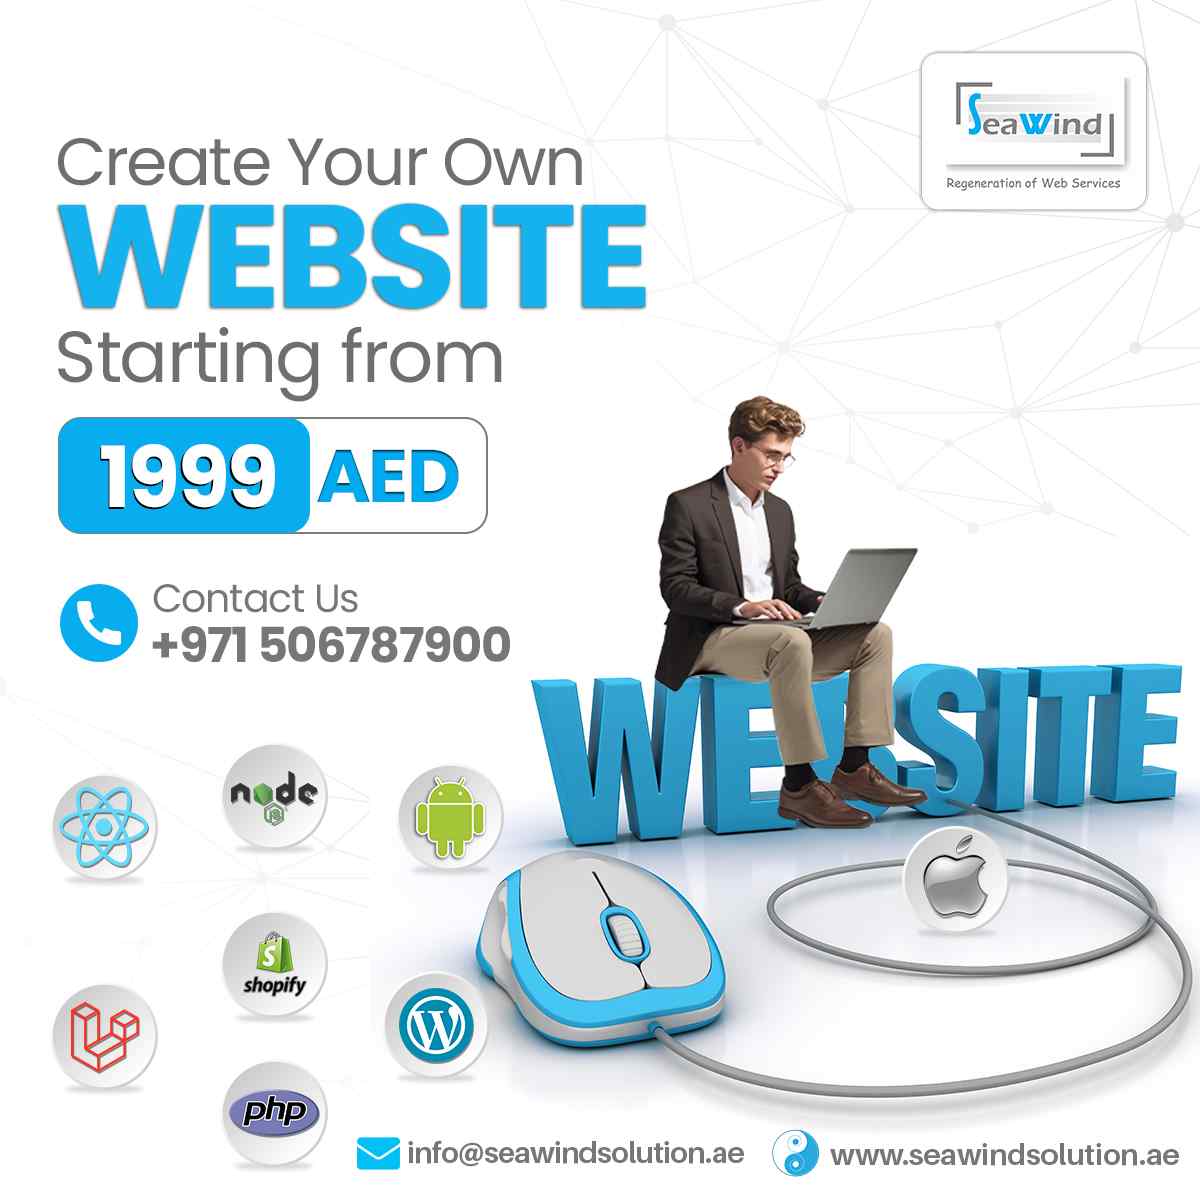 Launch your business online presence with our website packages starting at just 1999 AED! - Ras al-Khaimah Computer